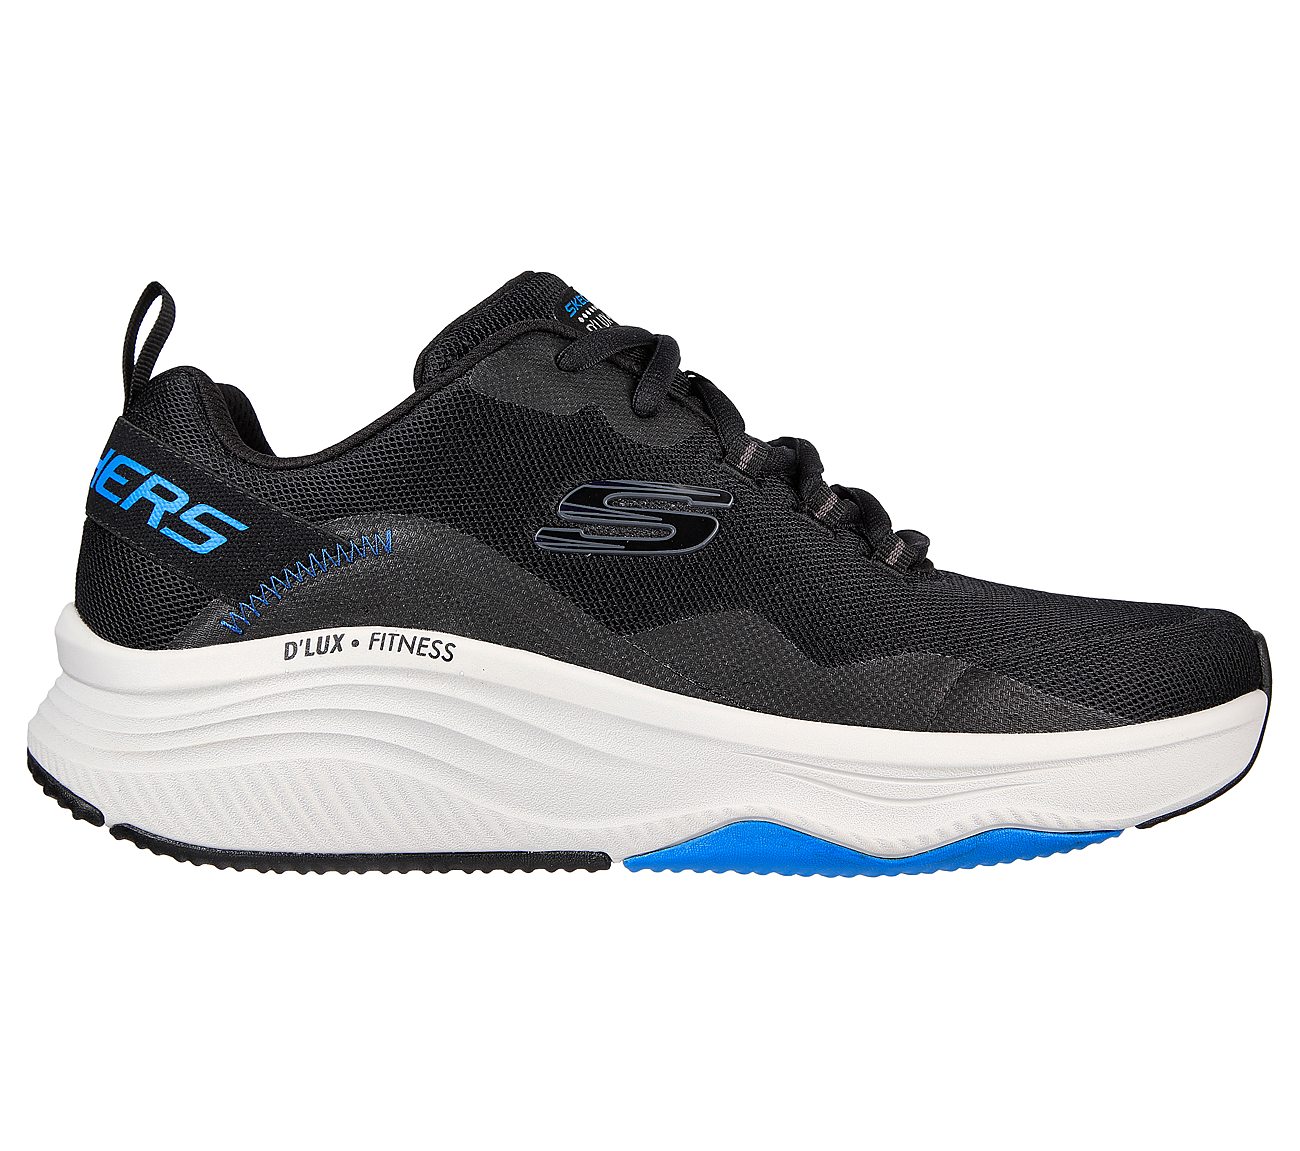 D'LUX FITNESS - ROAM FREE, BBBBLACK Footwear Lateral View